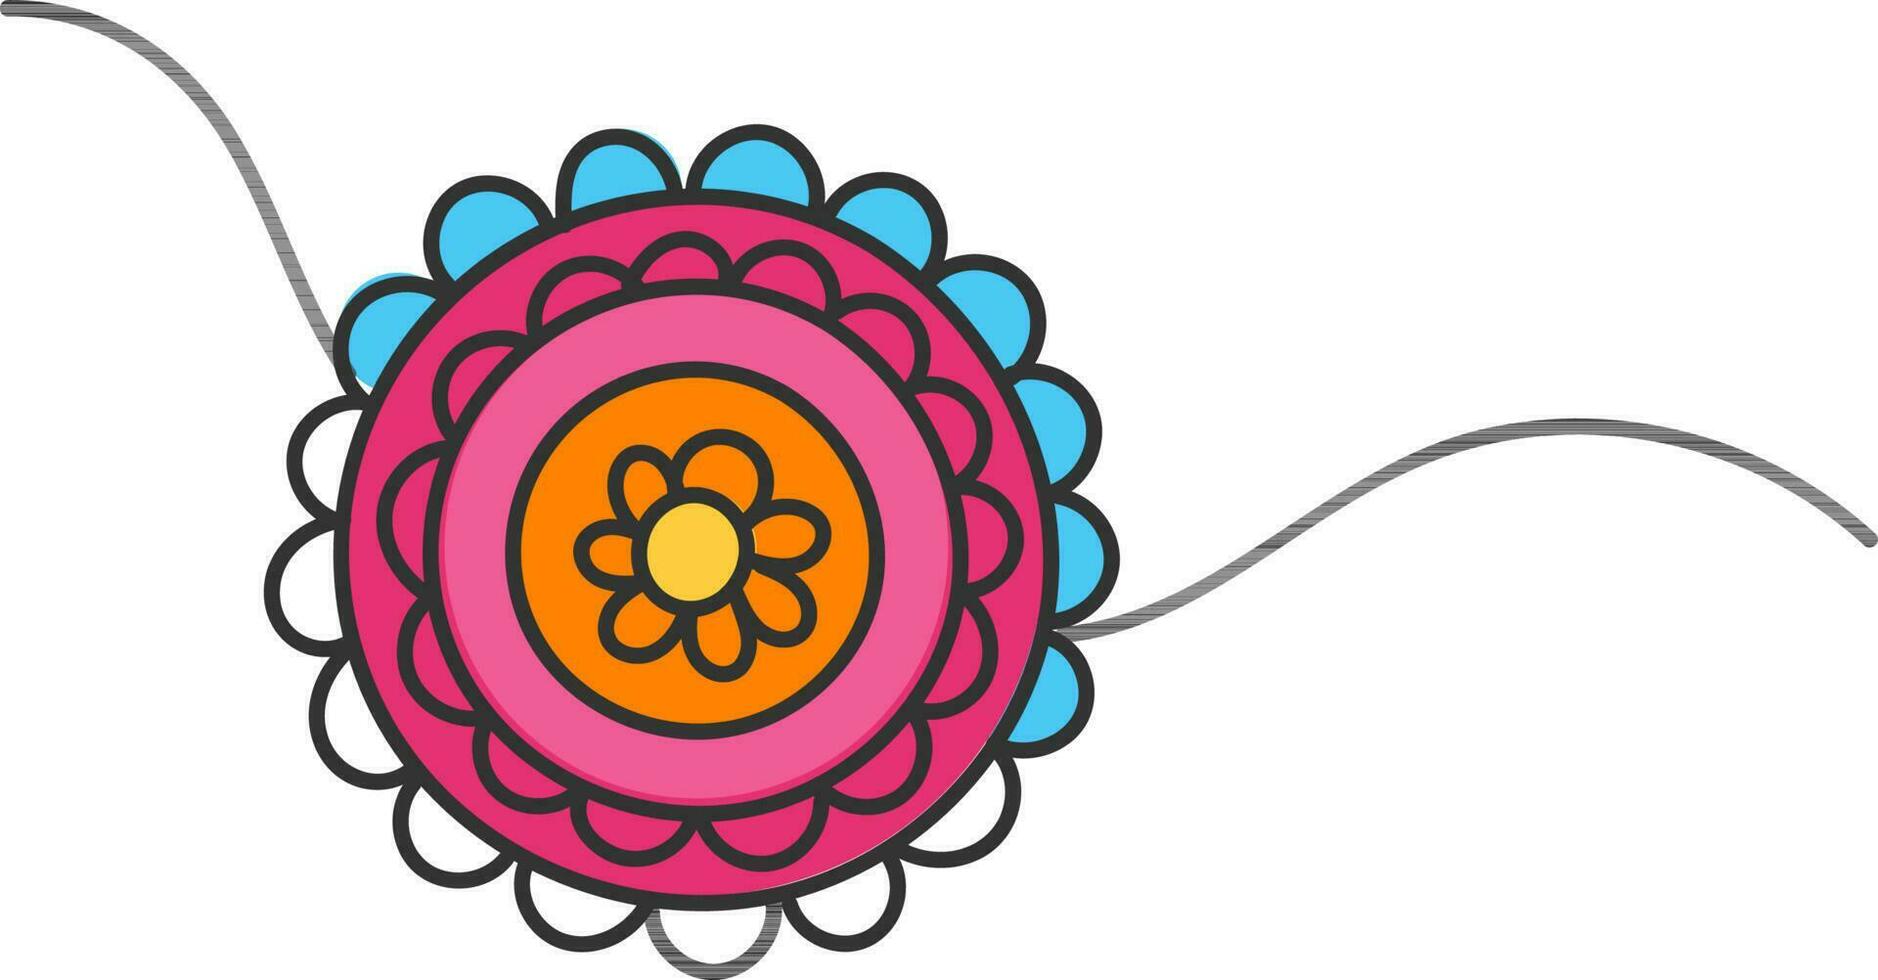 Colorful Rakhi Wristband Element In Flat Style. vector